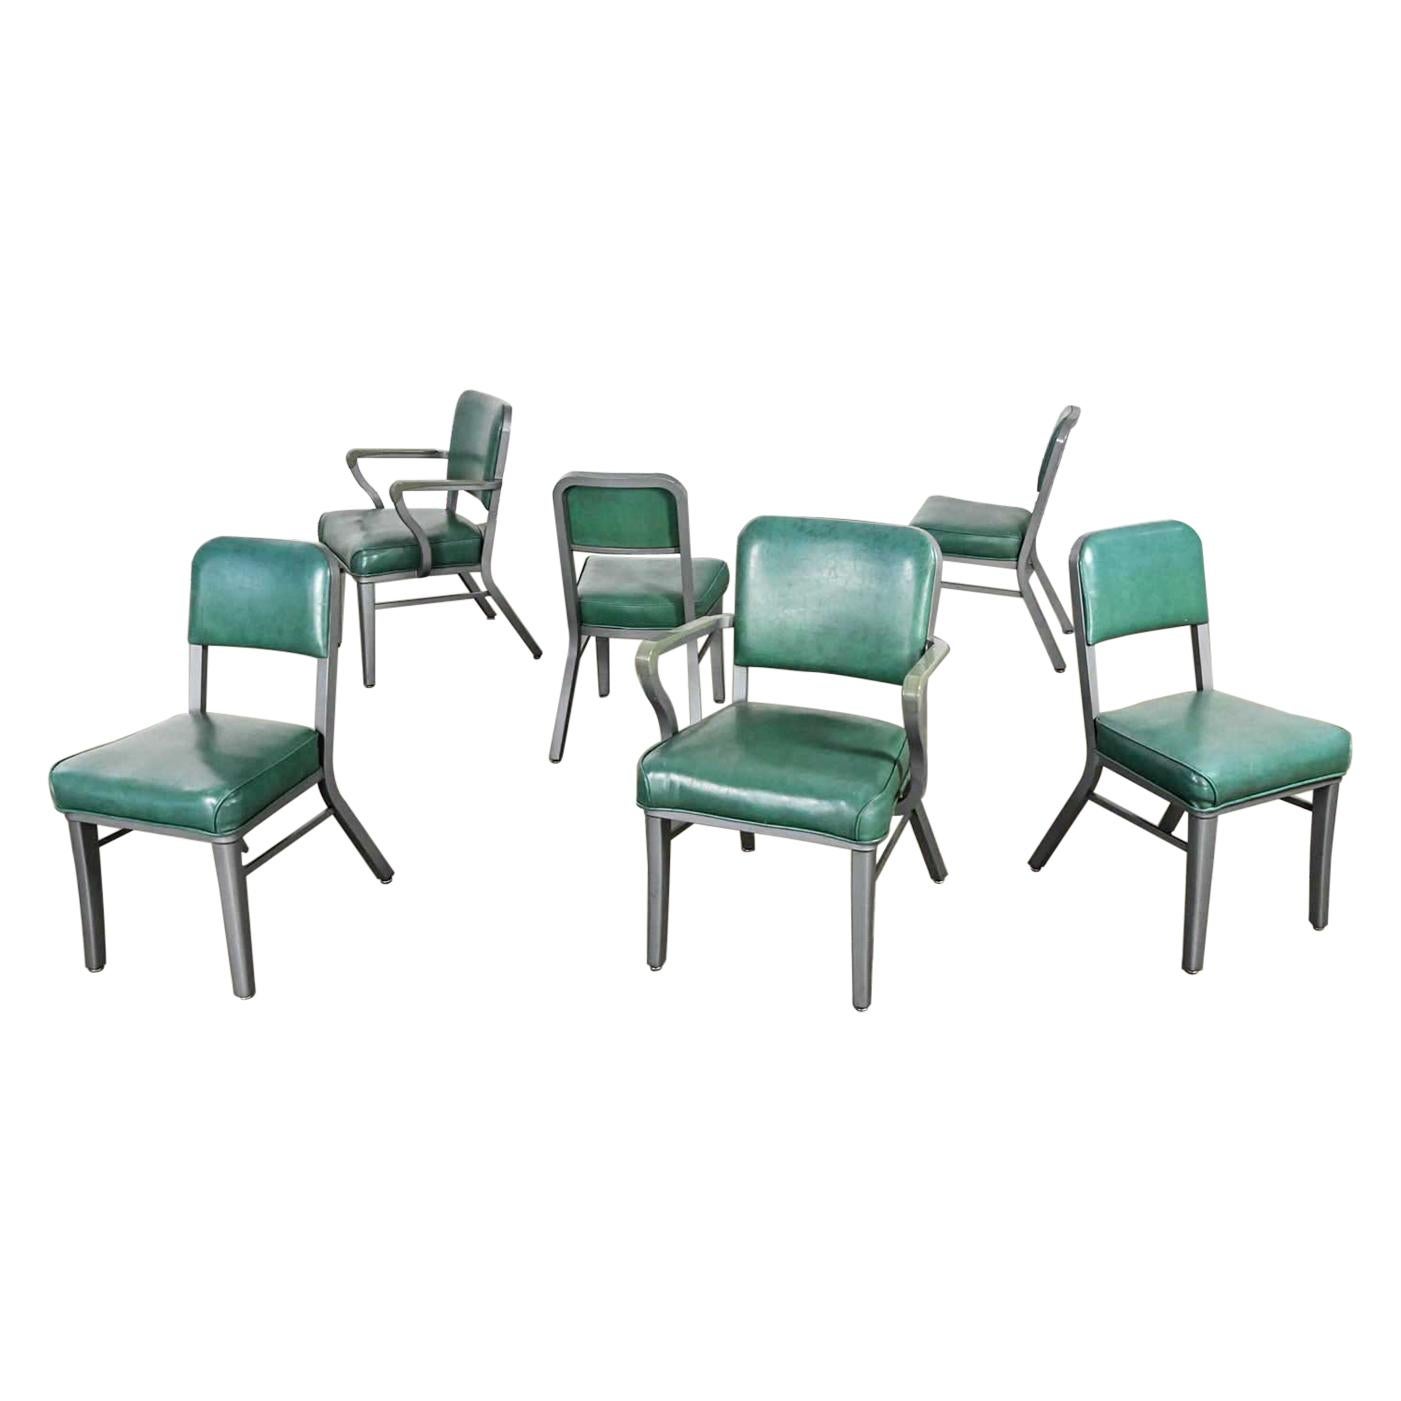 Streamline Industrial Metal & Green Vinyl Faux Leather Dining Chairs Set of 6